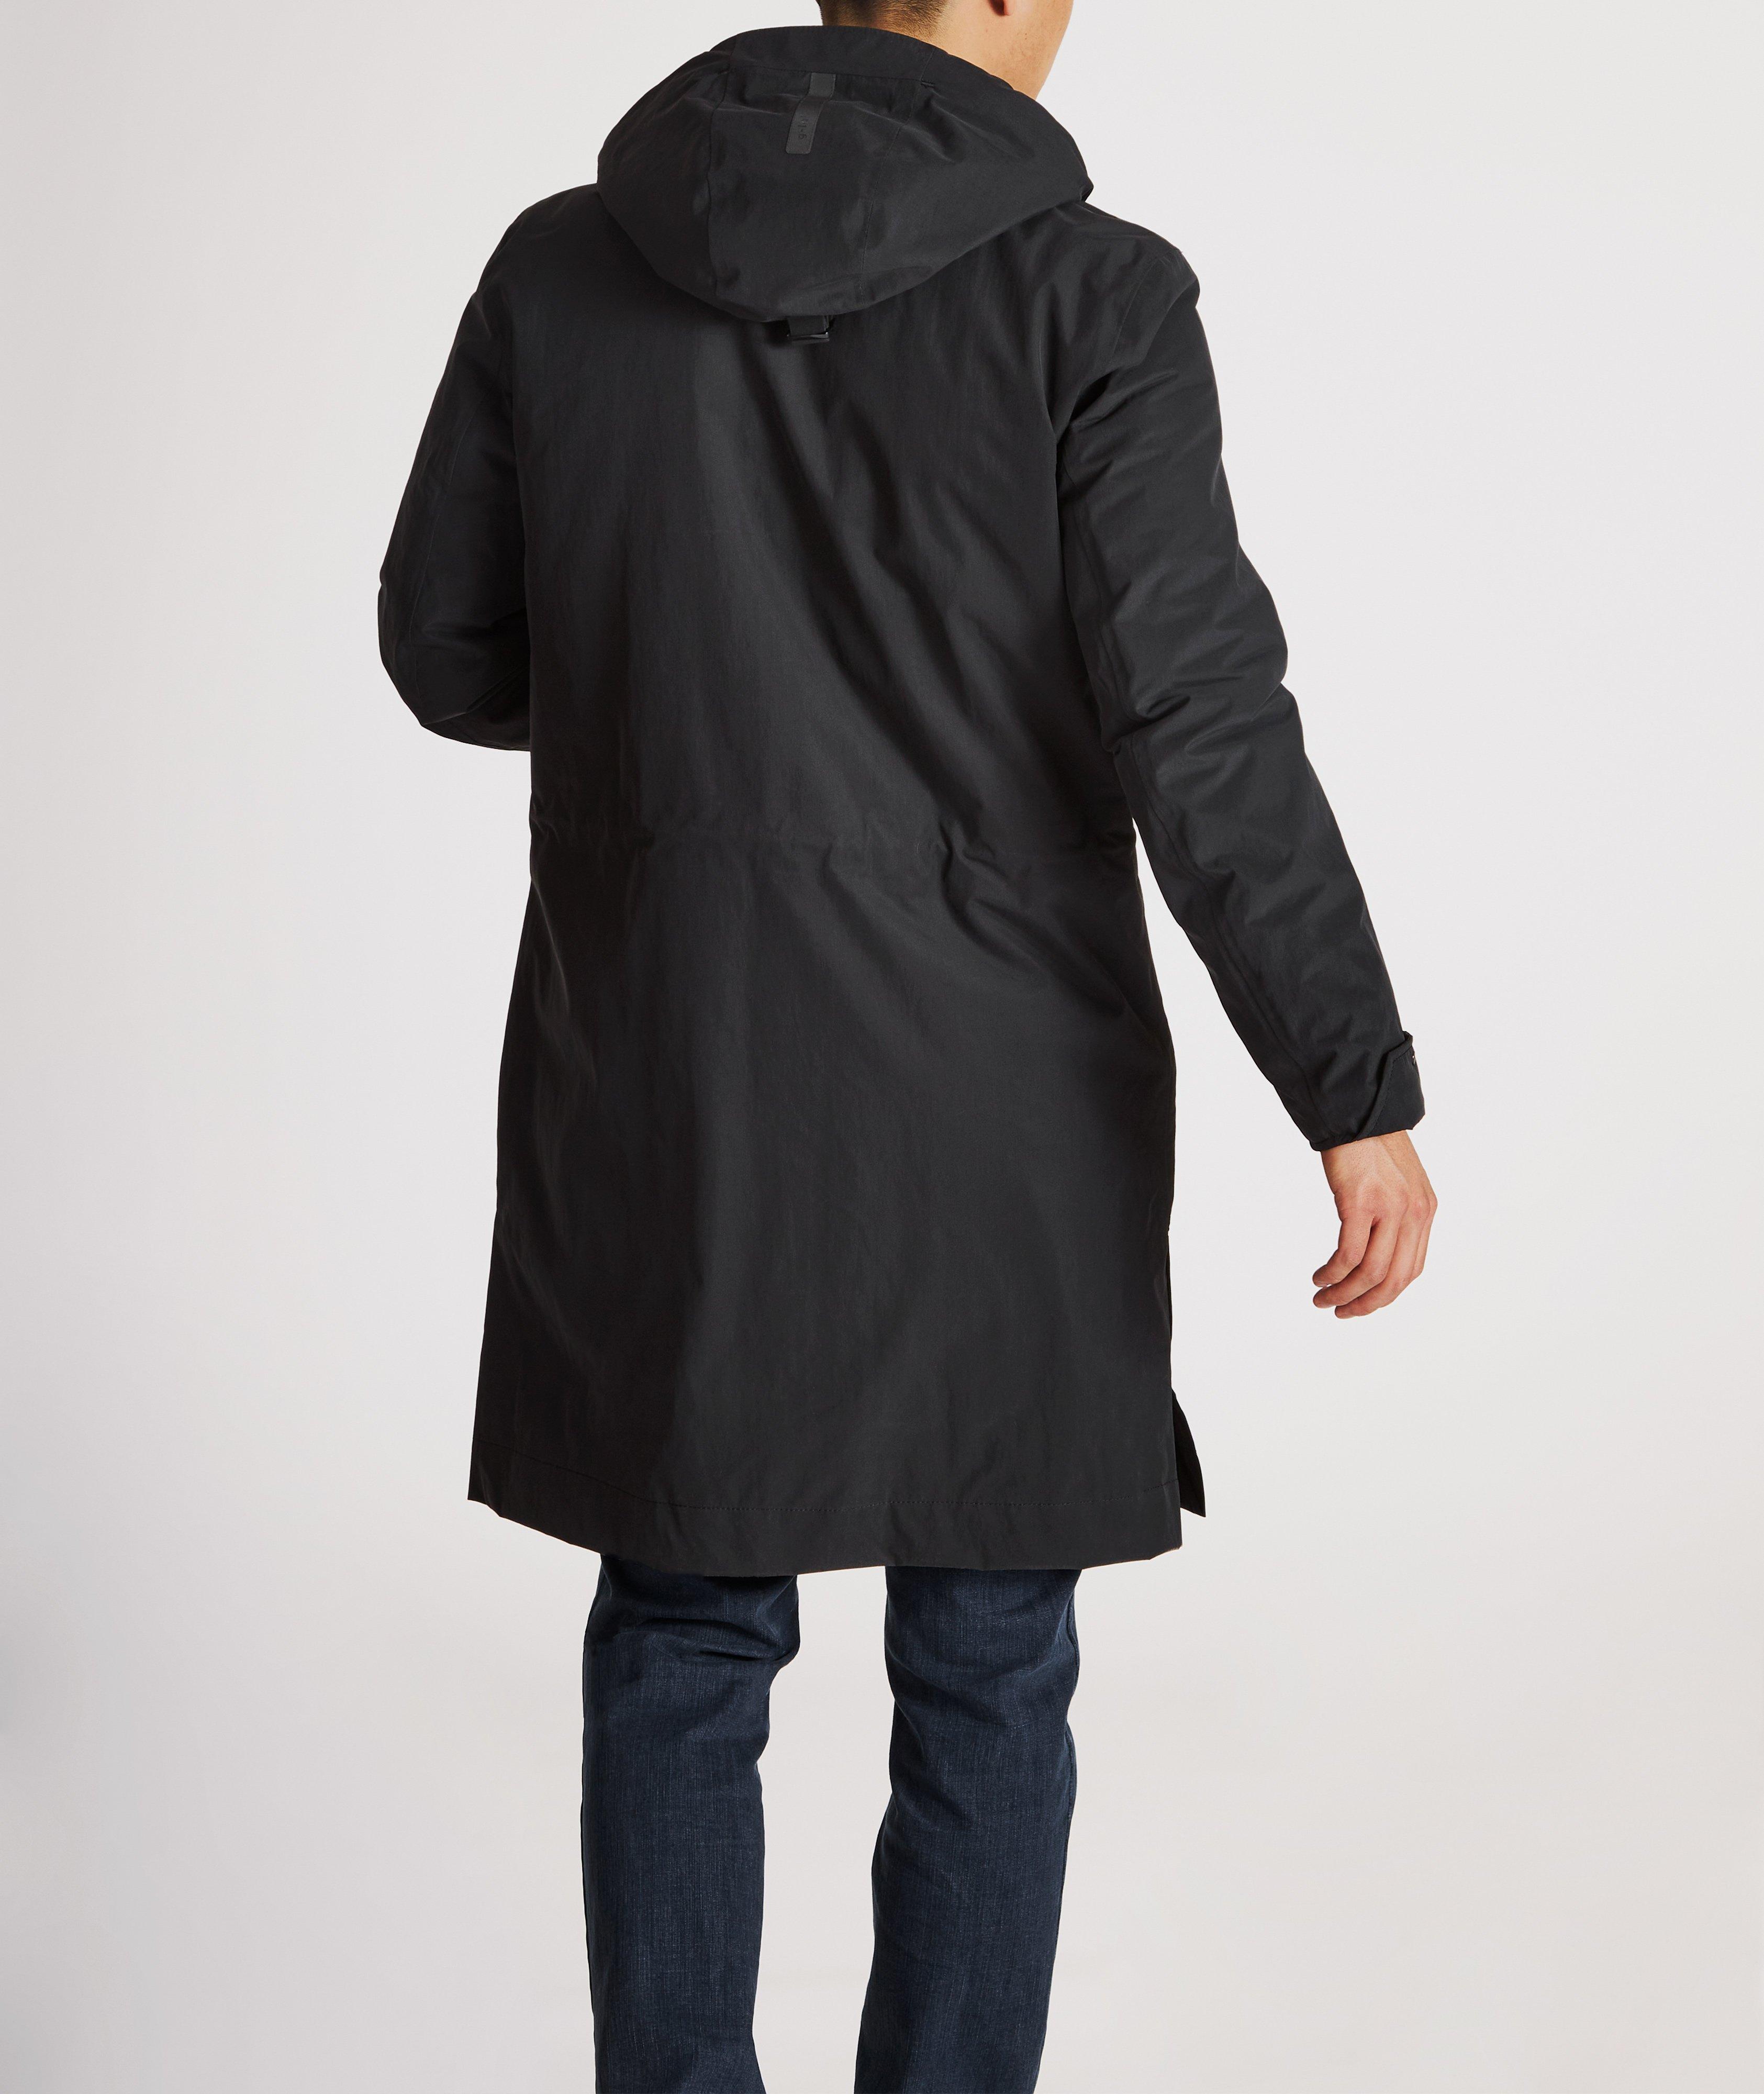 SHIELD Technical Hooded 3/4 Parka image 2